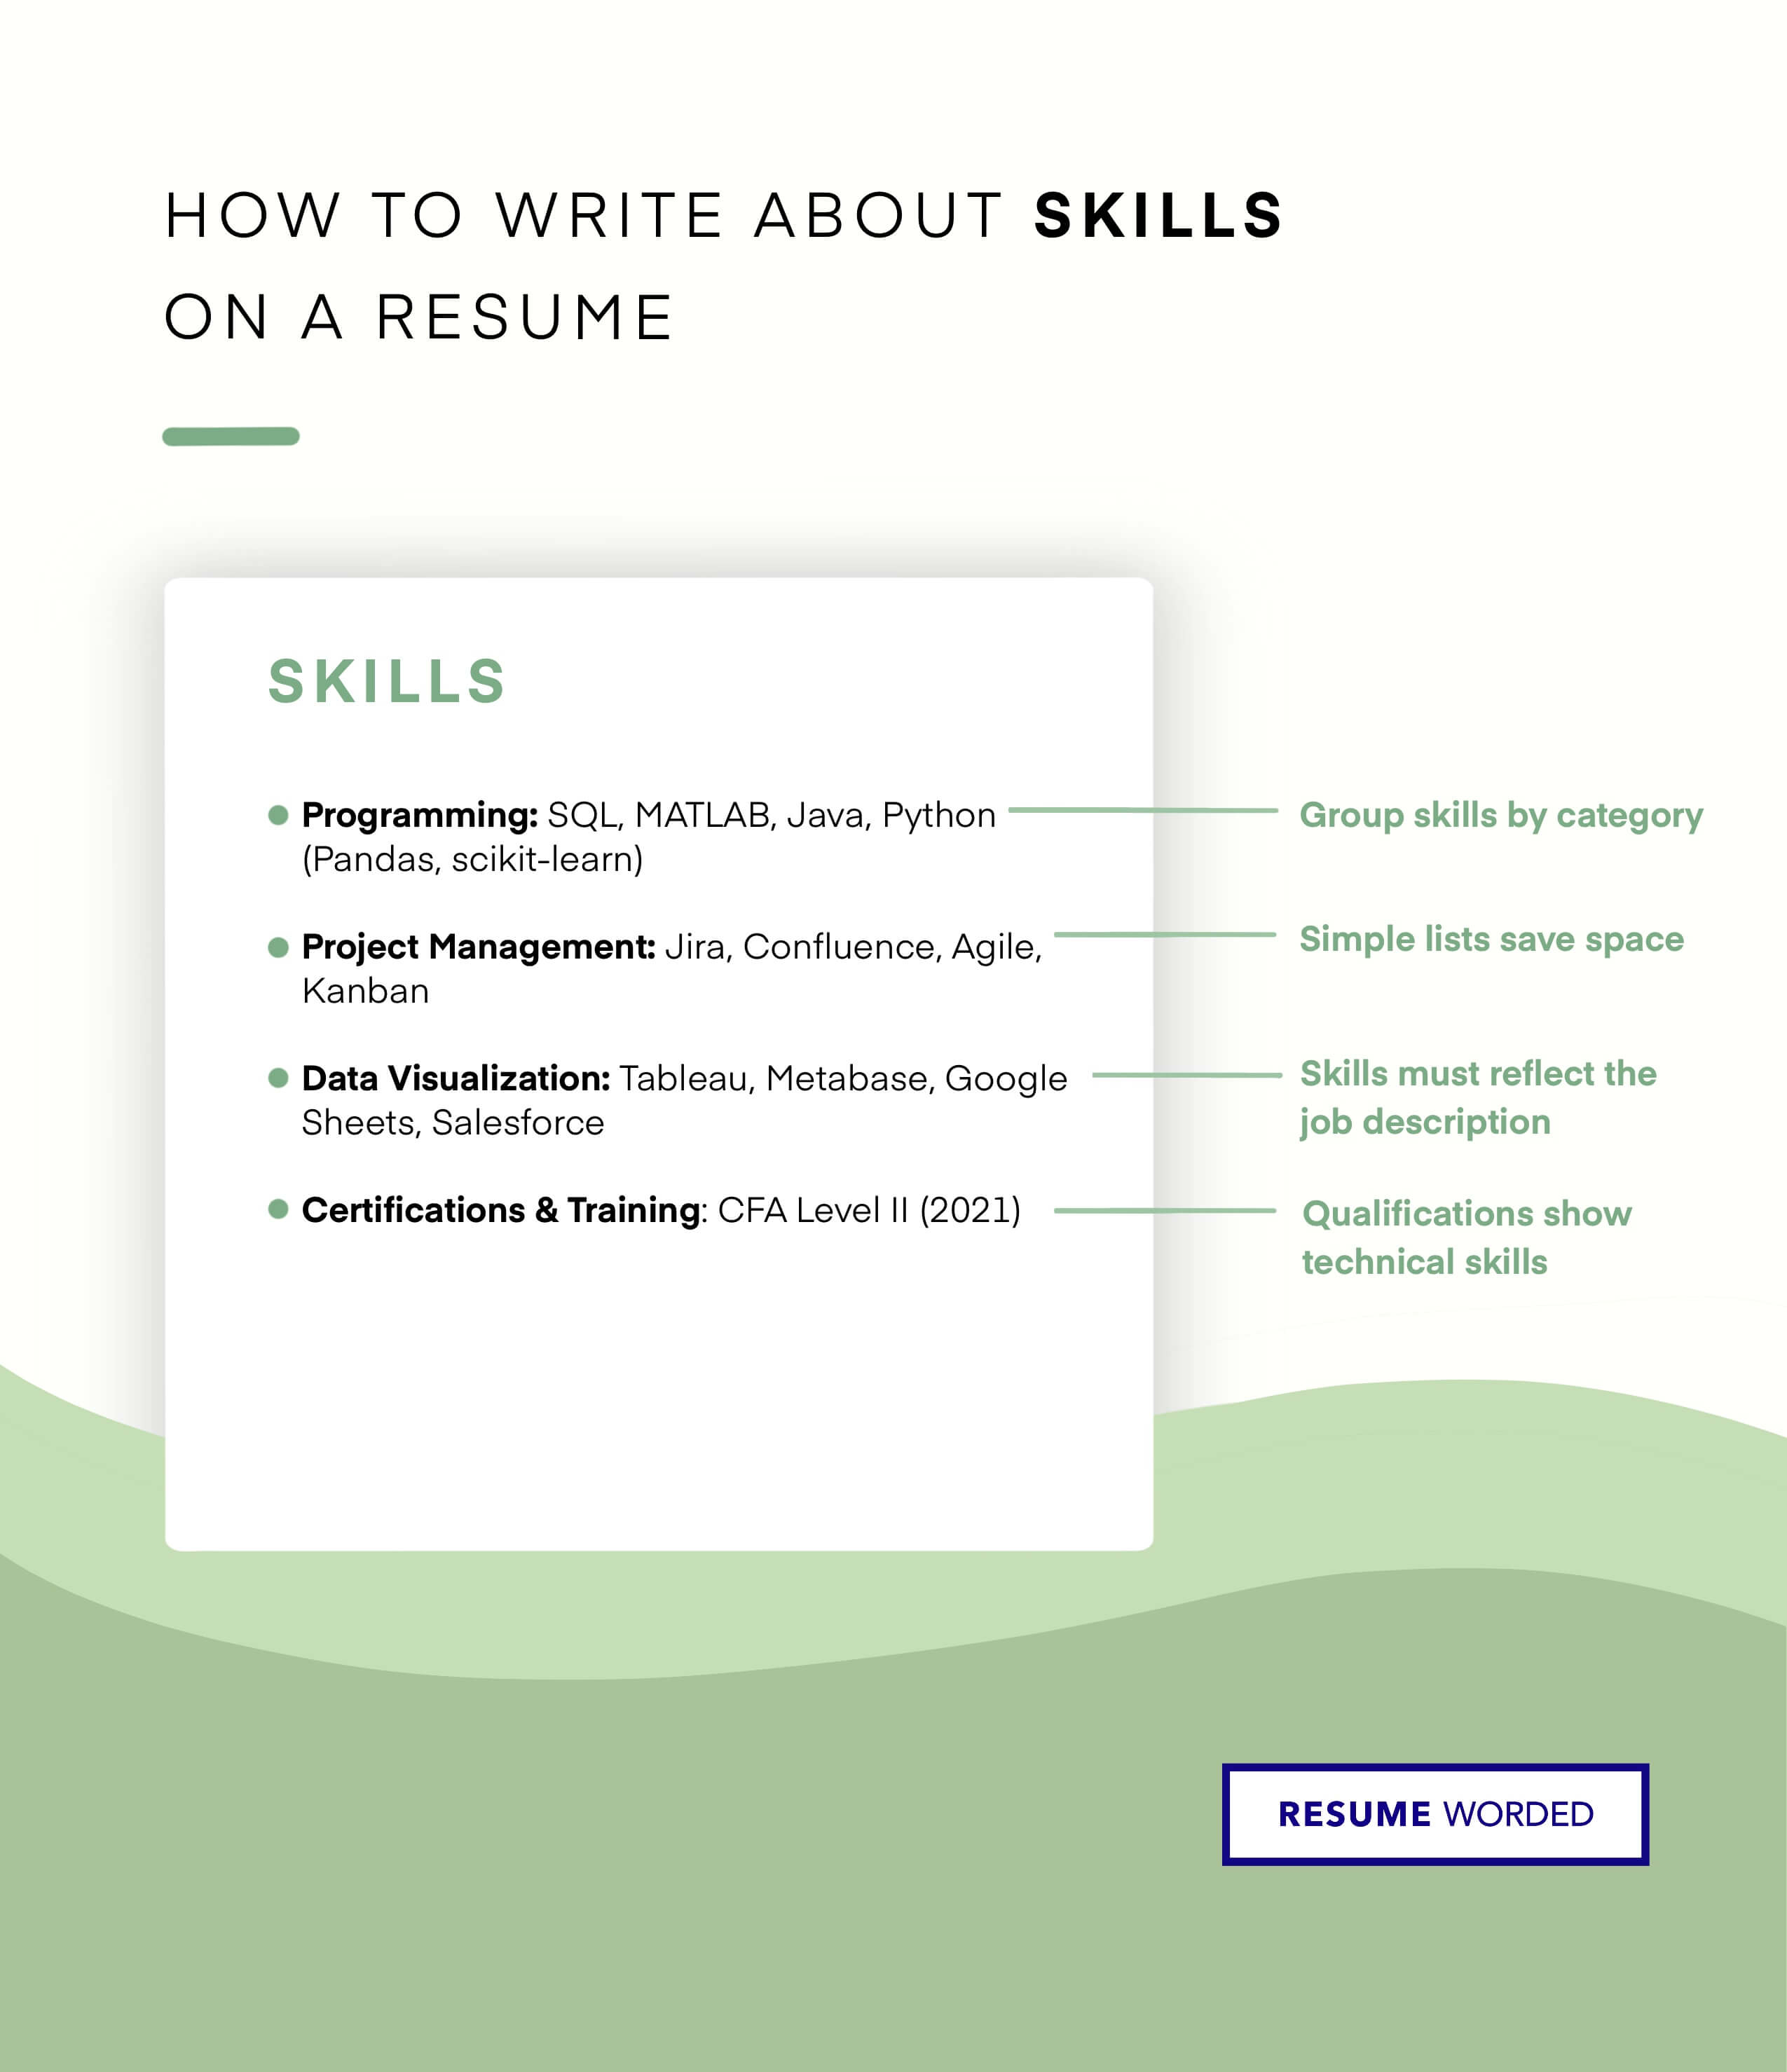 Use the skills section carefully to include loan-related keywords - Loan Underwriter Resume